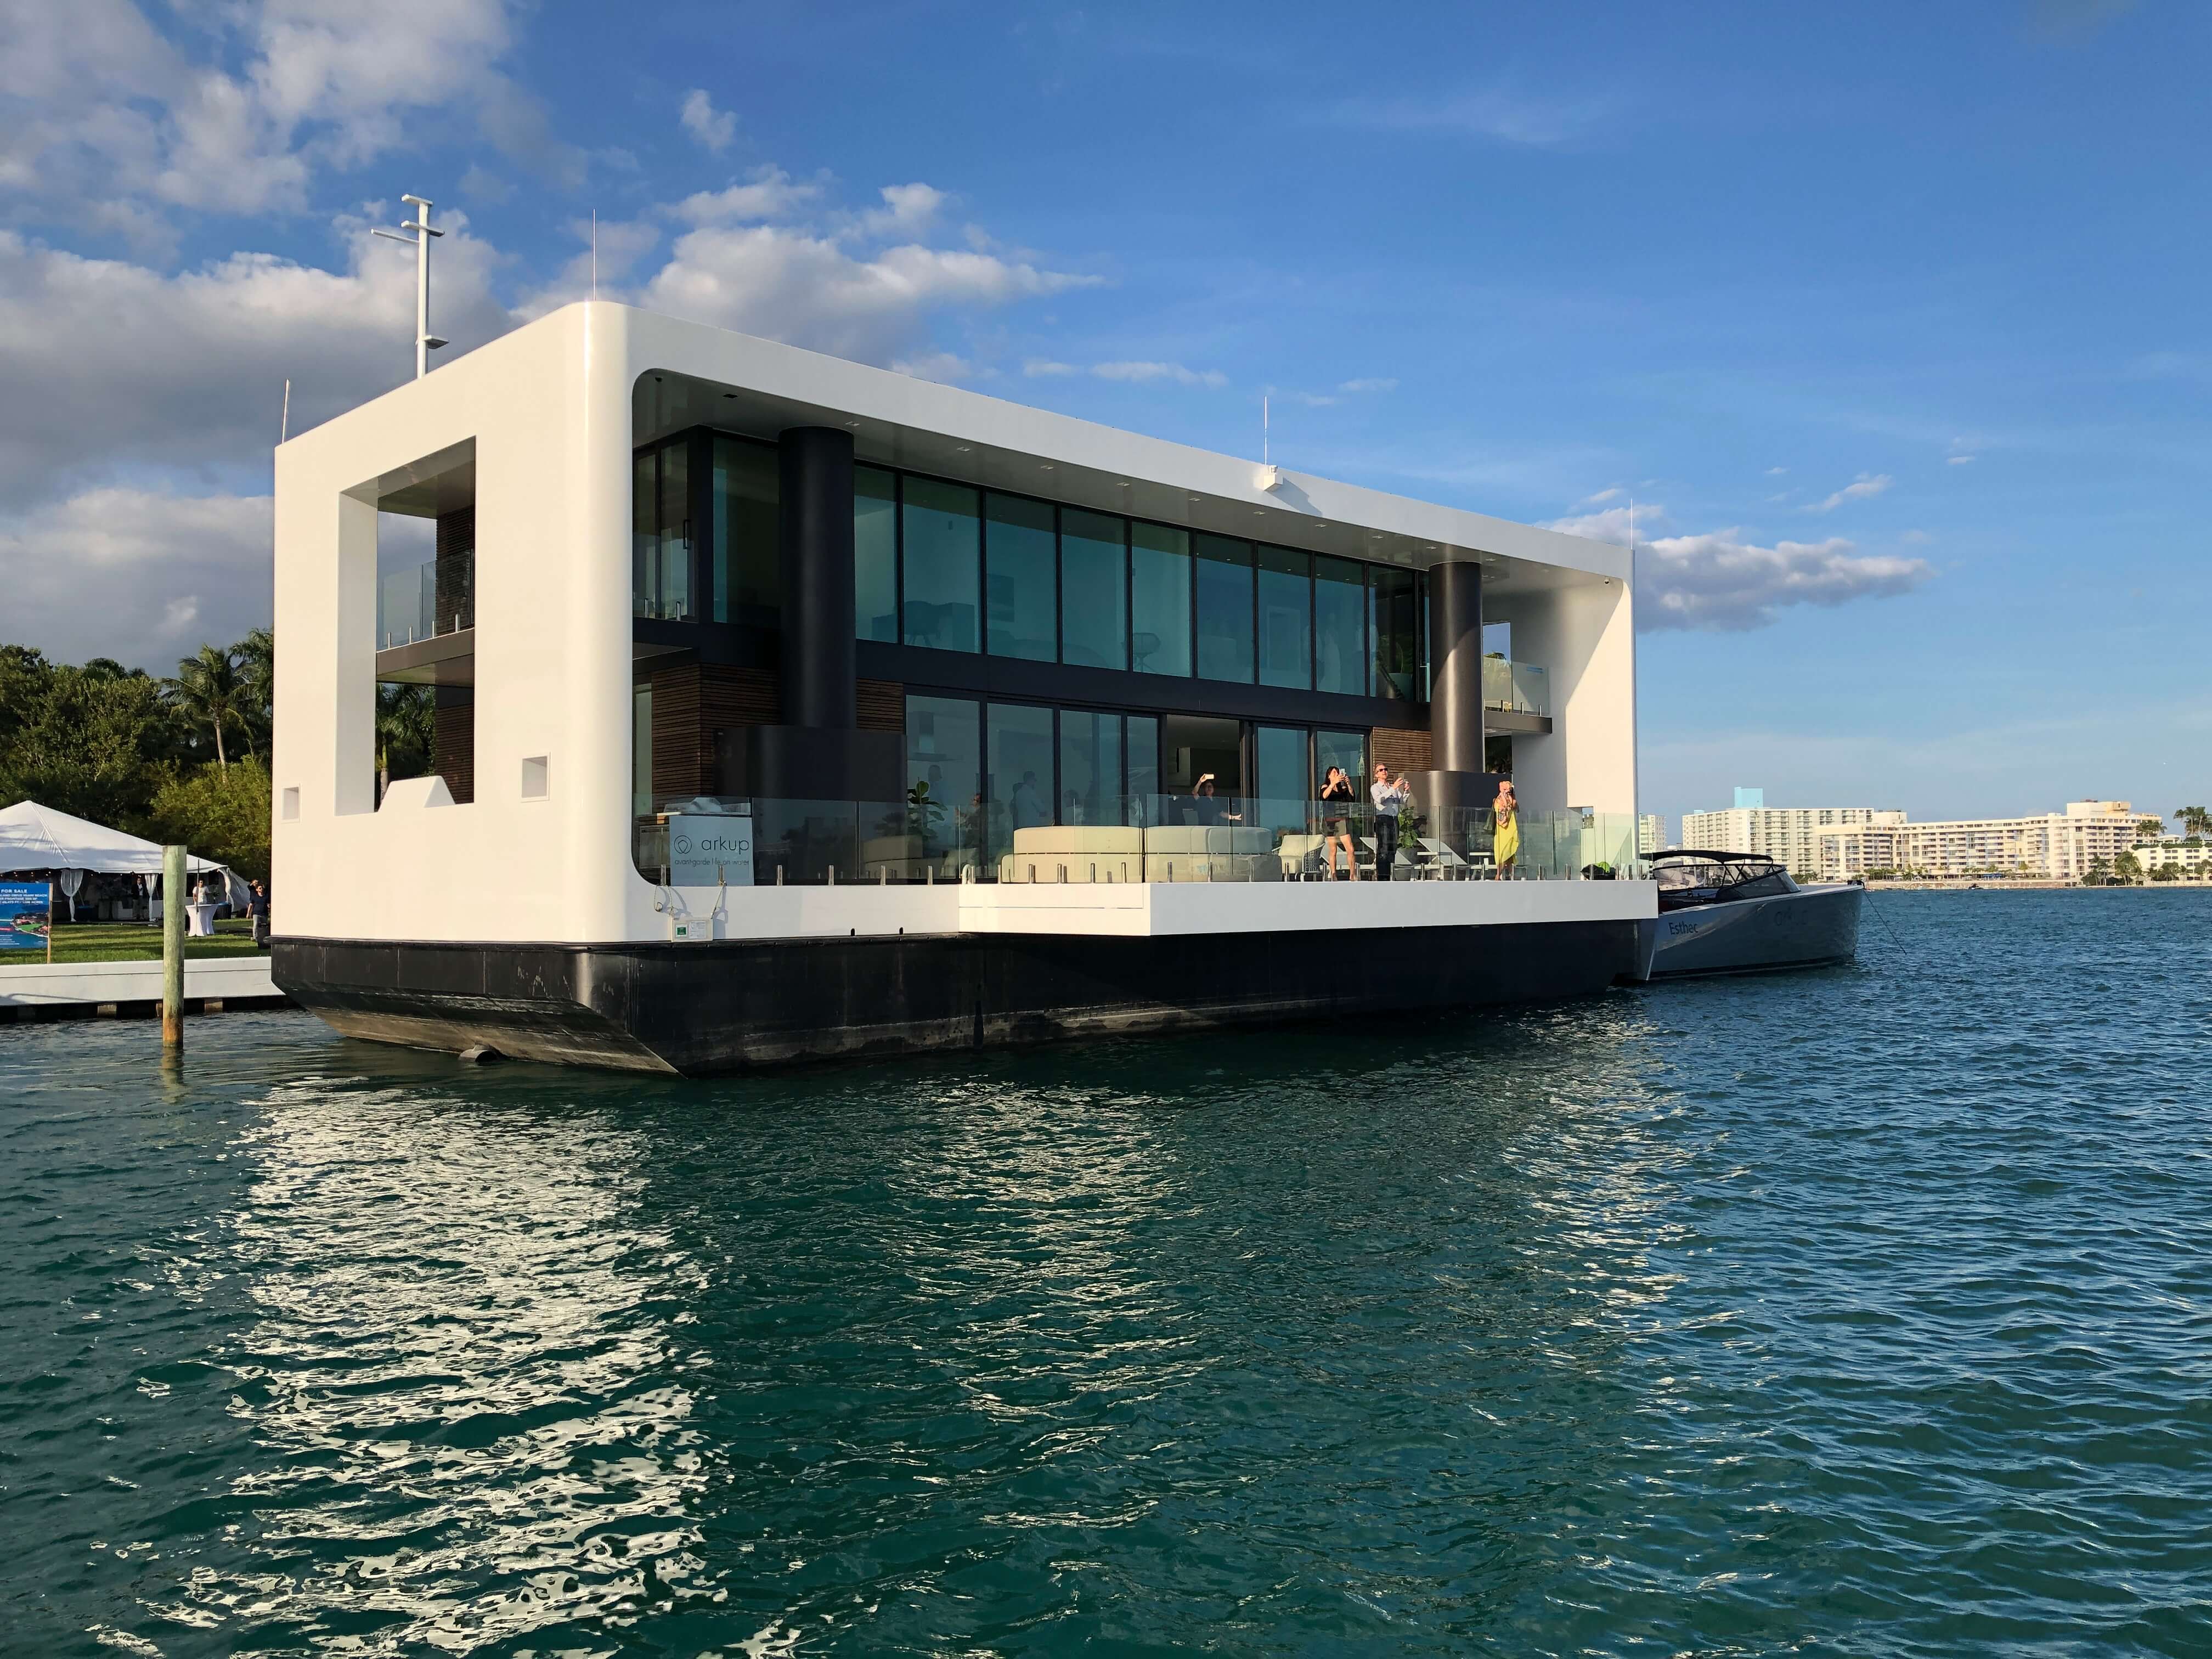 Luxury Green Floating Home With Solar Panels And Excellent Insulation